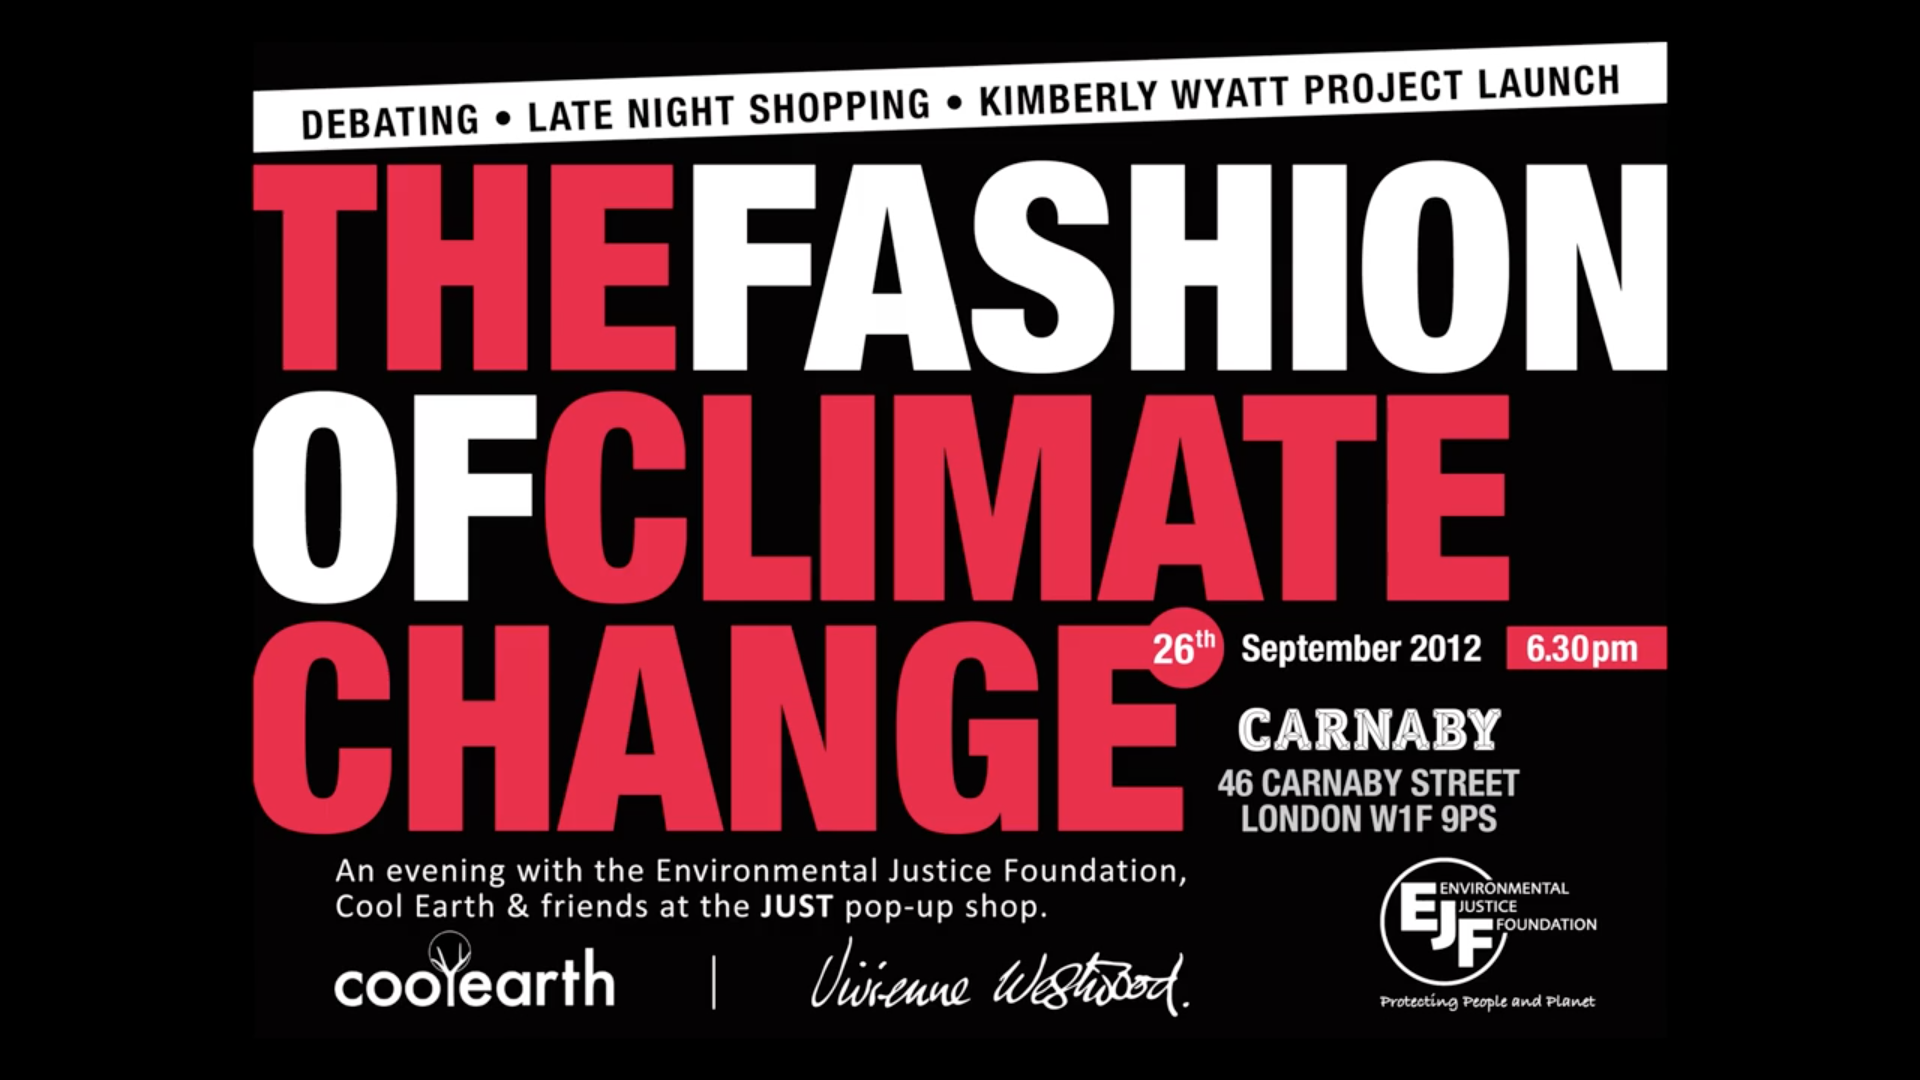 Launch of EJF’s JUST Pop Up Shop on London's Carnaby Street